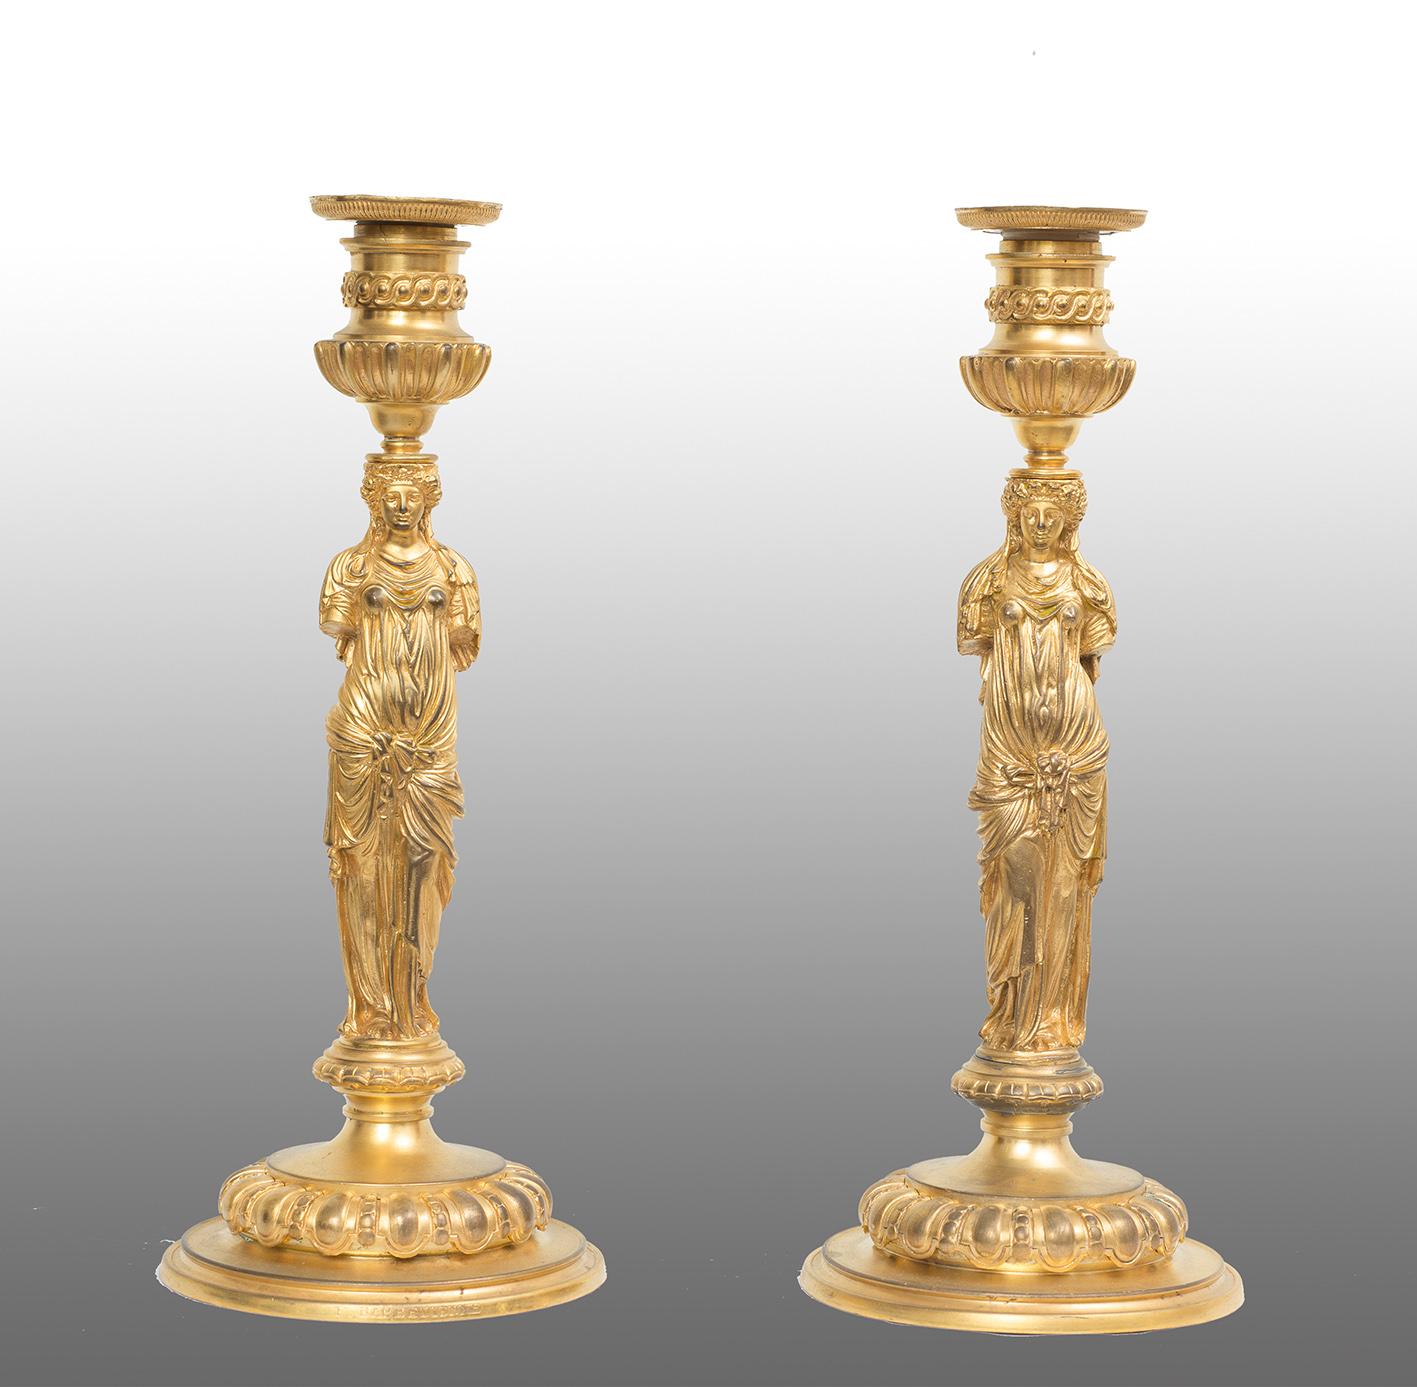 Unknown Figurative Sculpture - Pair of antique French Empire candelabra signed "Barbedienne."